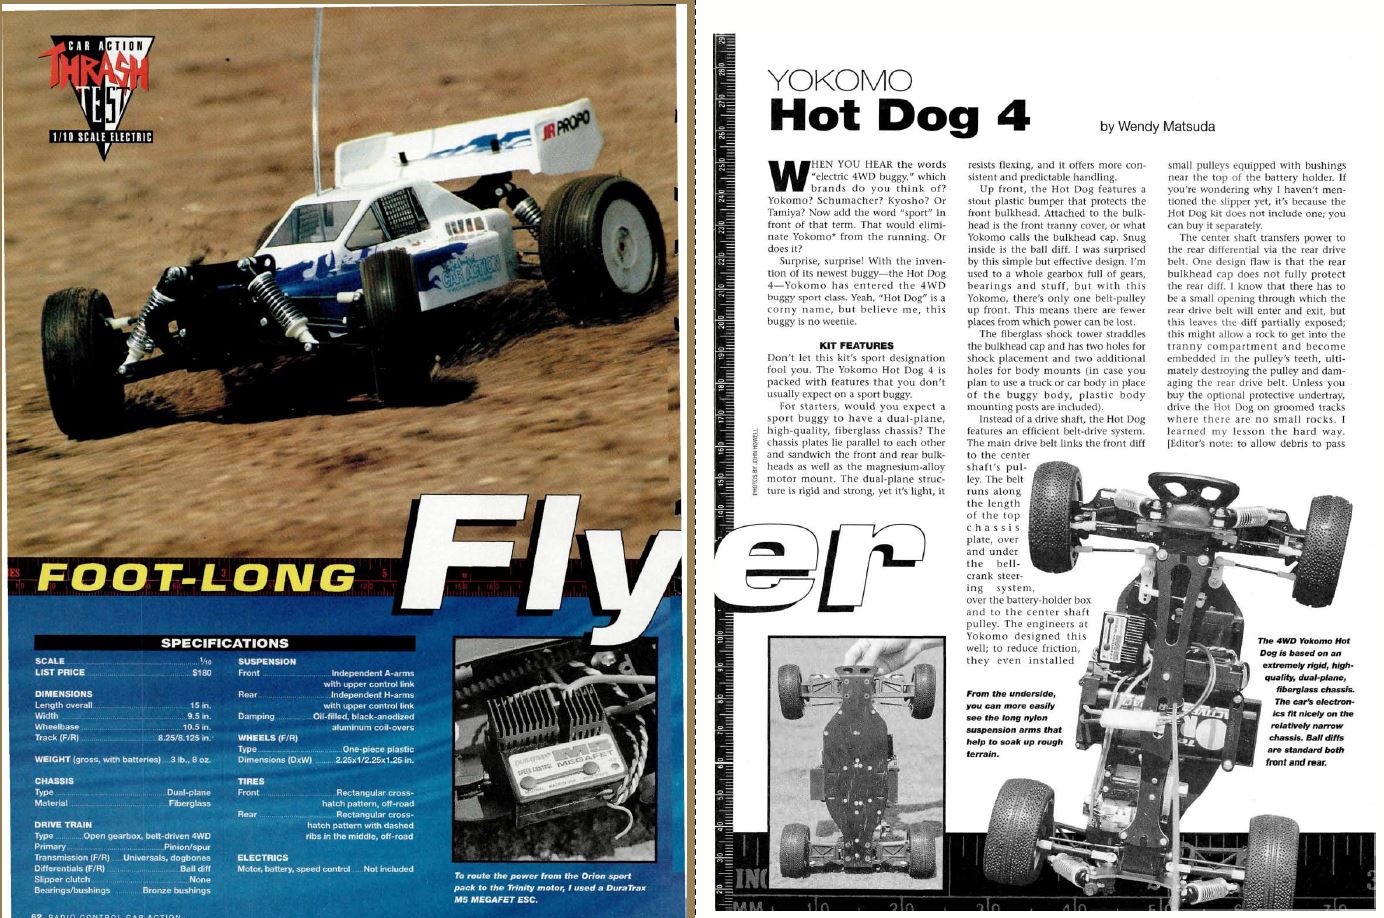 RC Car Action - RC Cars & Trucks | #TBT Yokomo Hot Dog 4 4WD off-road Buggy Reviews in 1996 Issue